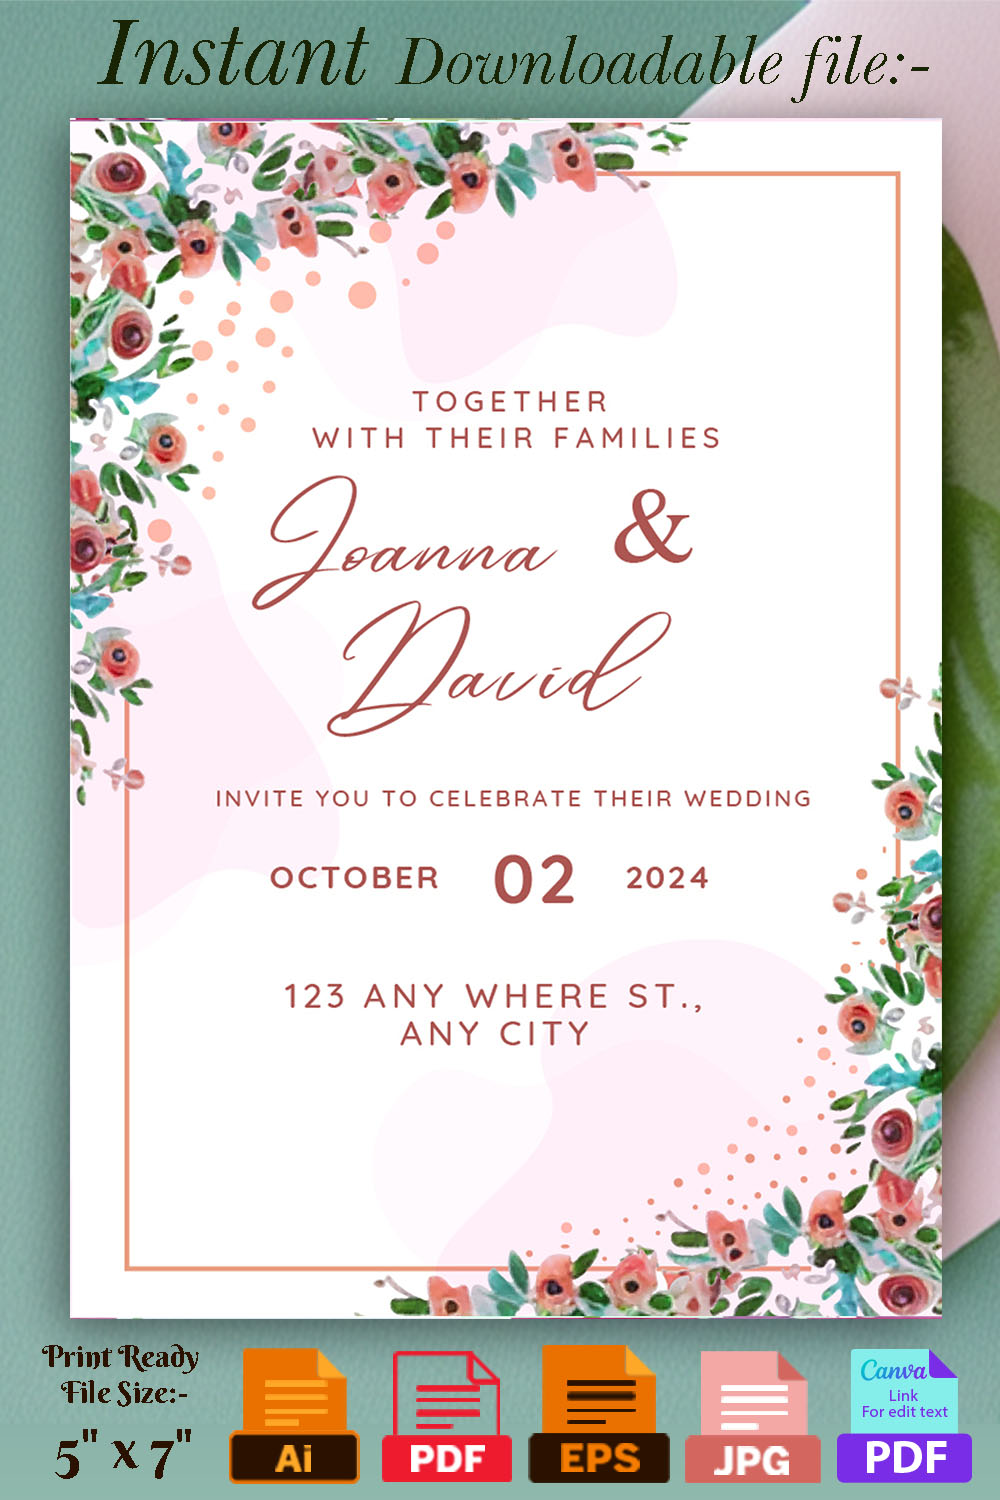 Beautiful Wedding Invitation Card Design Template - pinterest image preview.